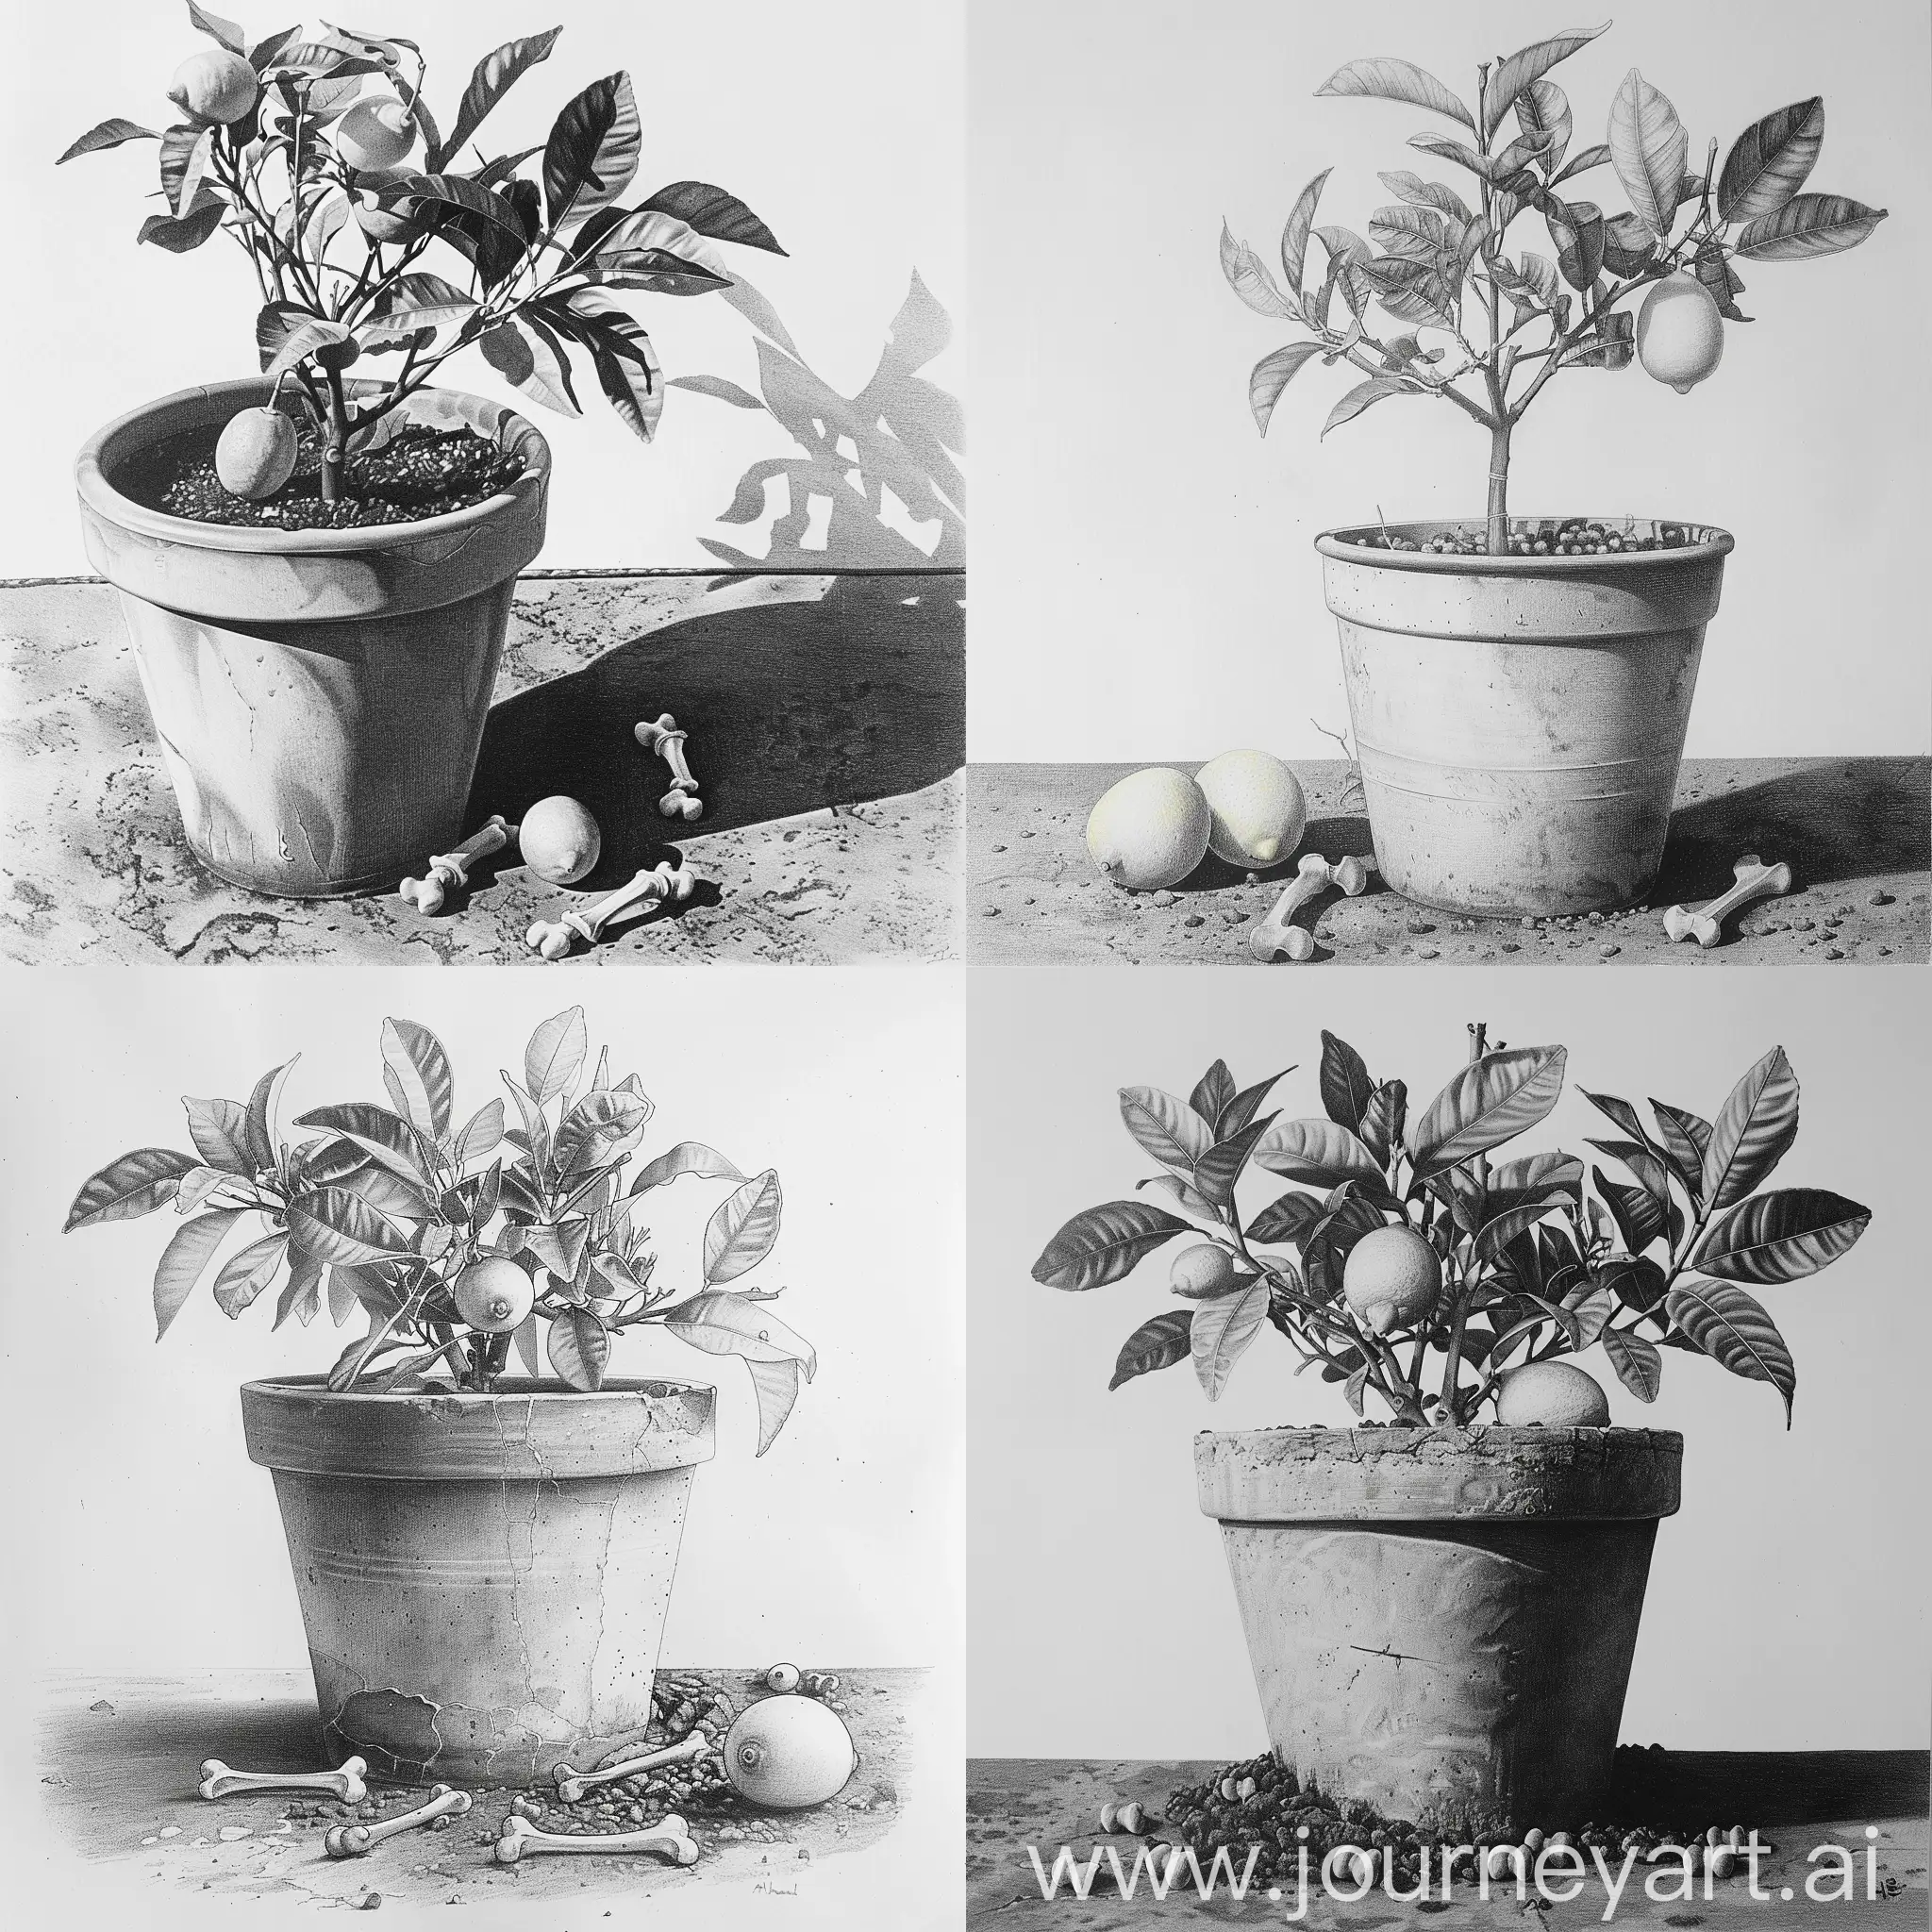 pencil drawing, black and white. graphics, a pot with a small lemon tree, small bones are visible from the ground